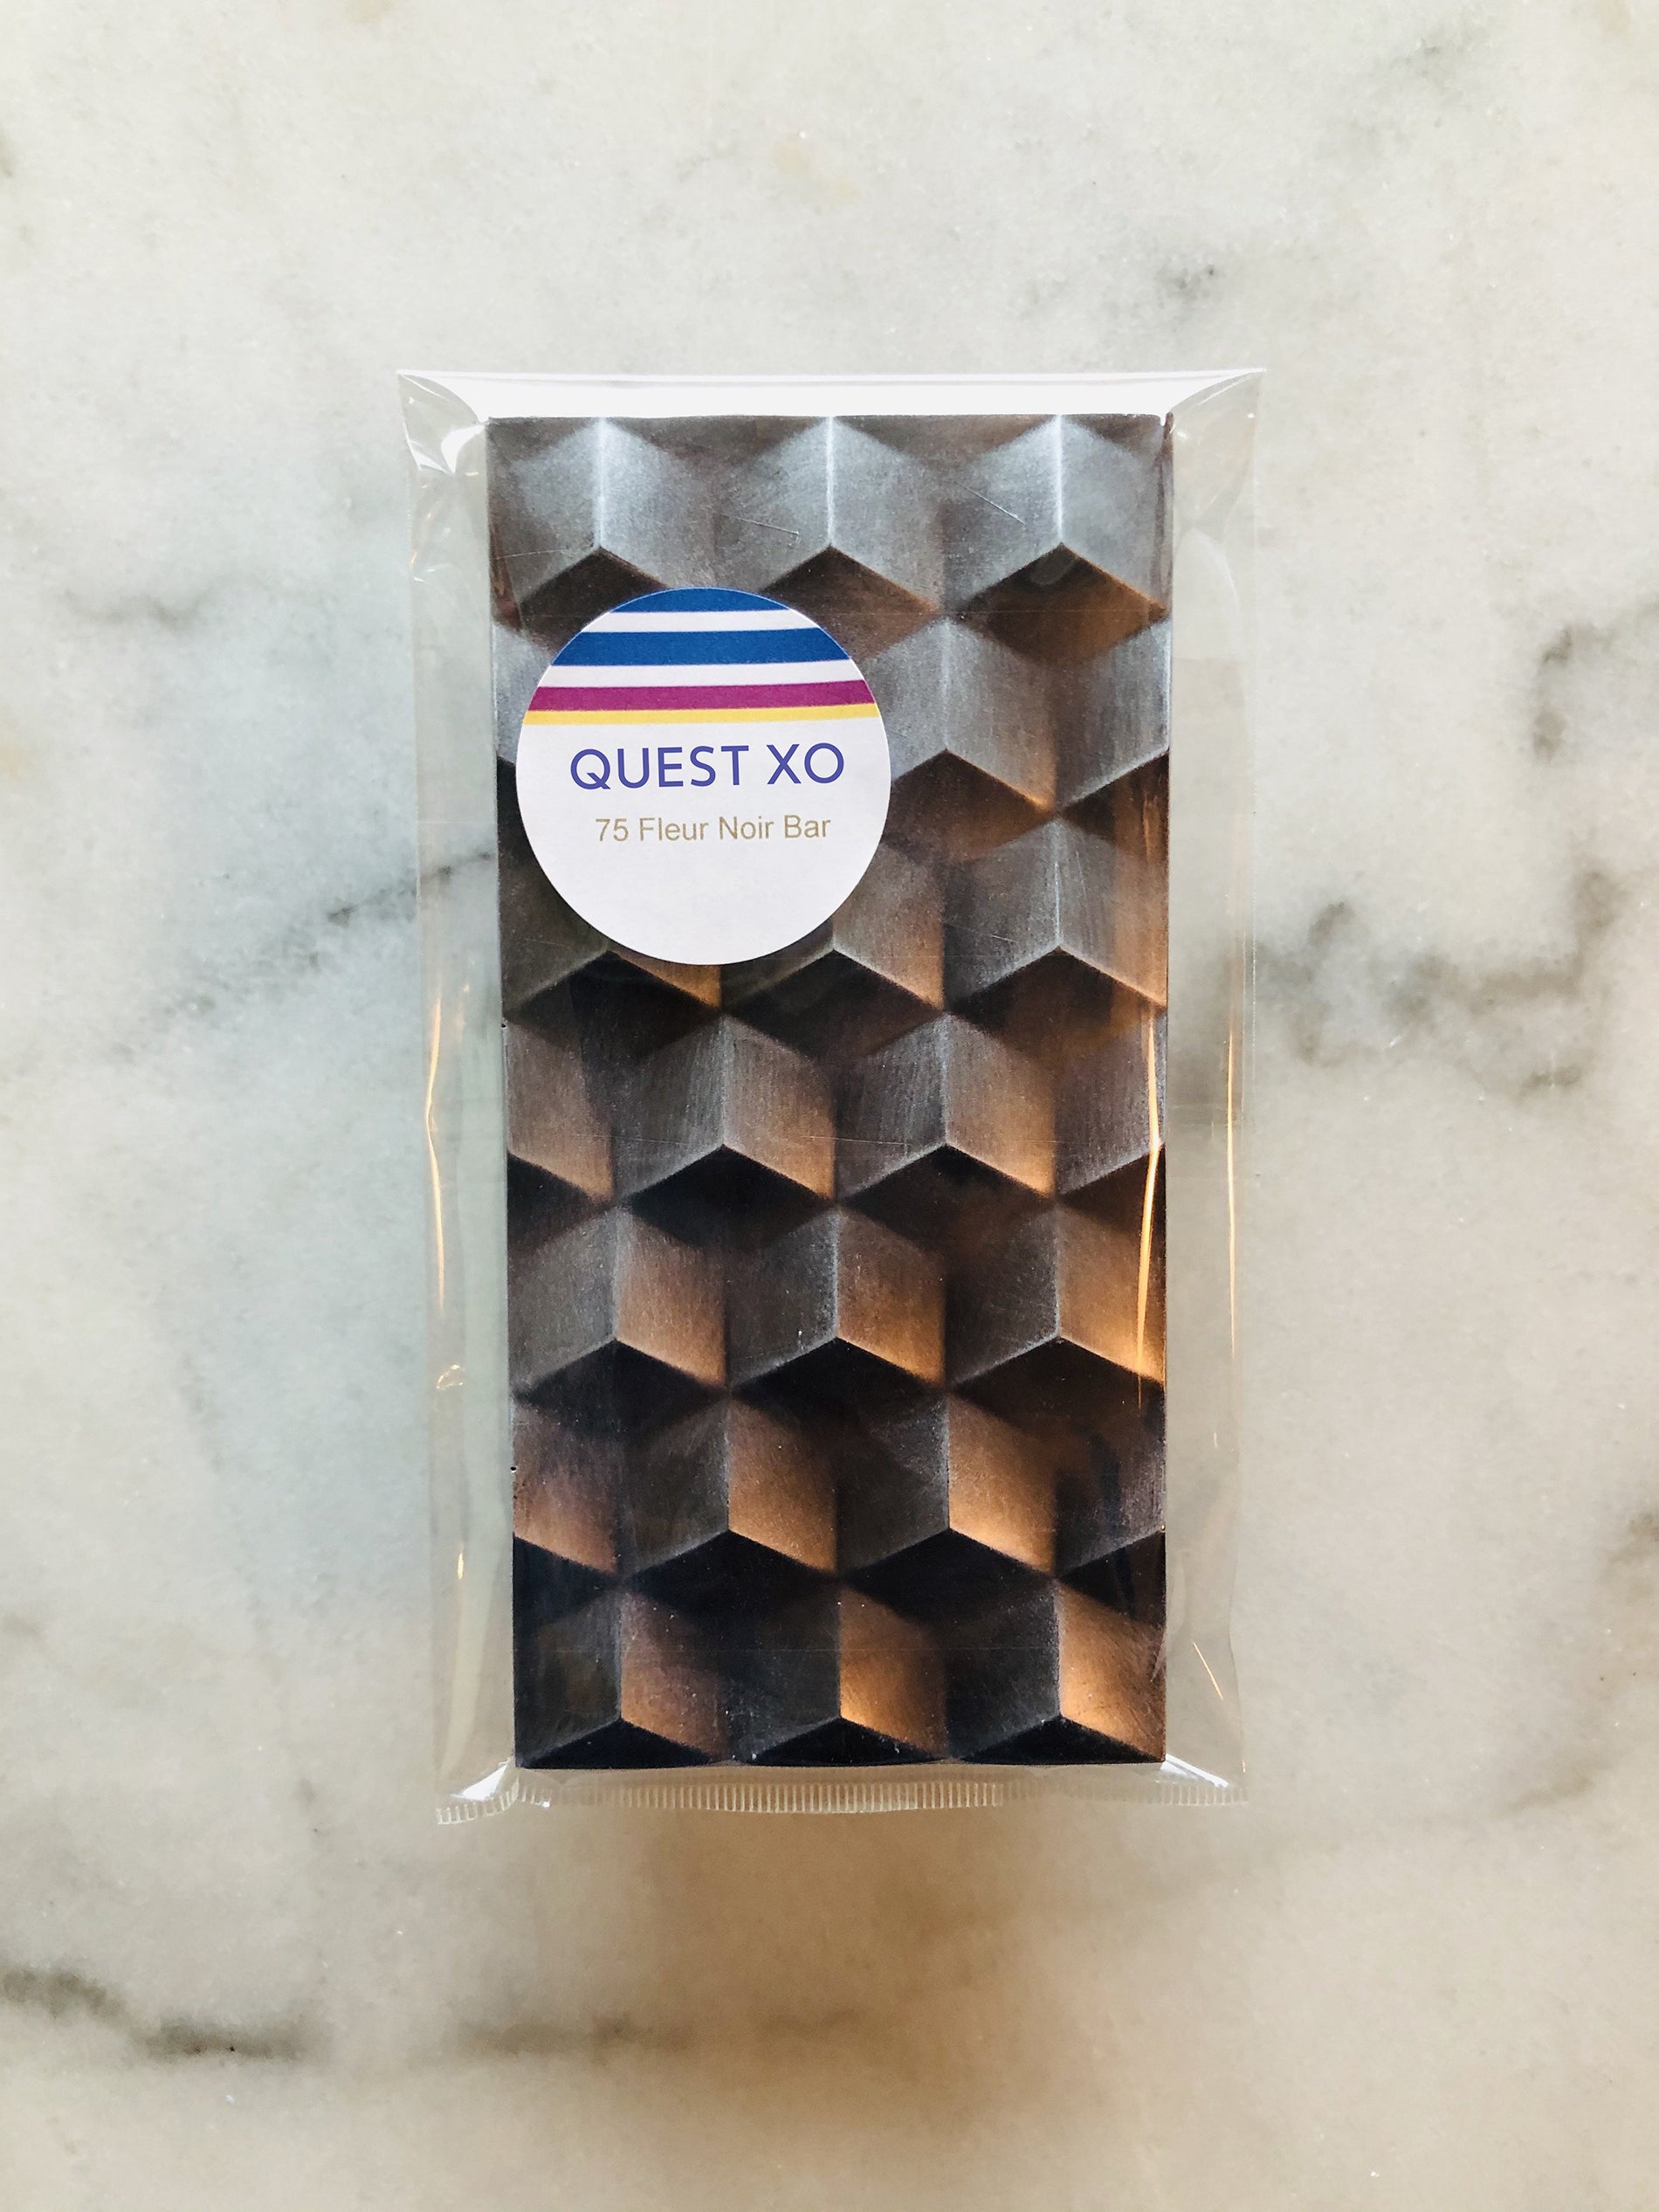 QUEST XO 75 Fleur Noir Bar: Dark brown chocolate bar with hexagonal shapes wrapped in a transparent plastic with QUEST XO logo placed on a marble background.